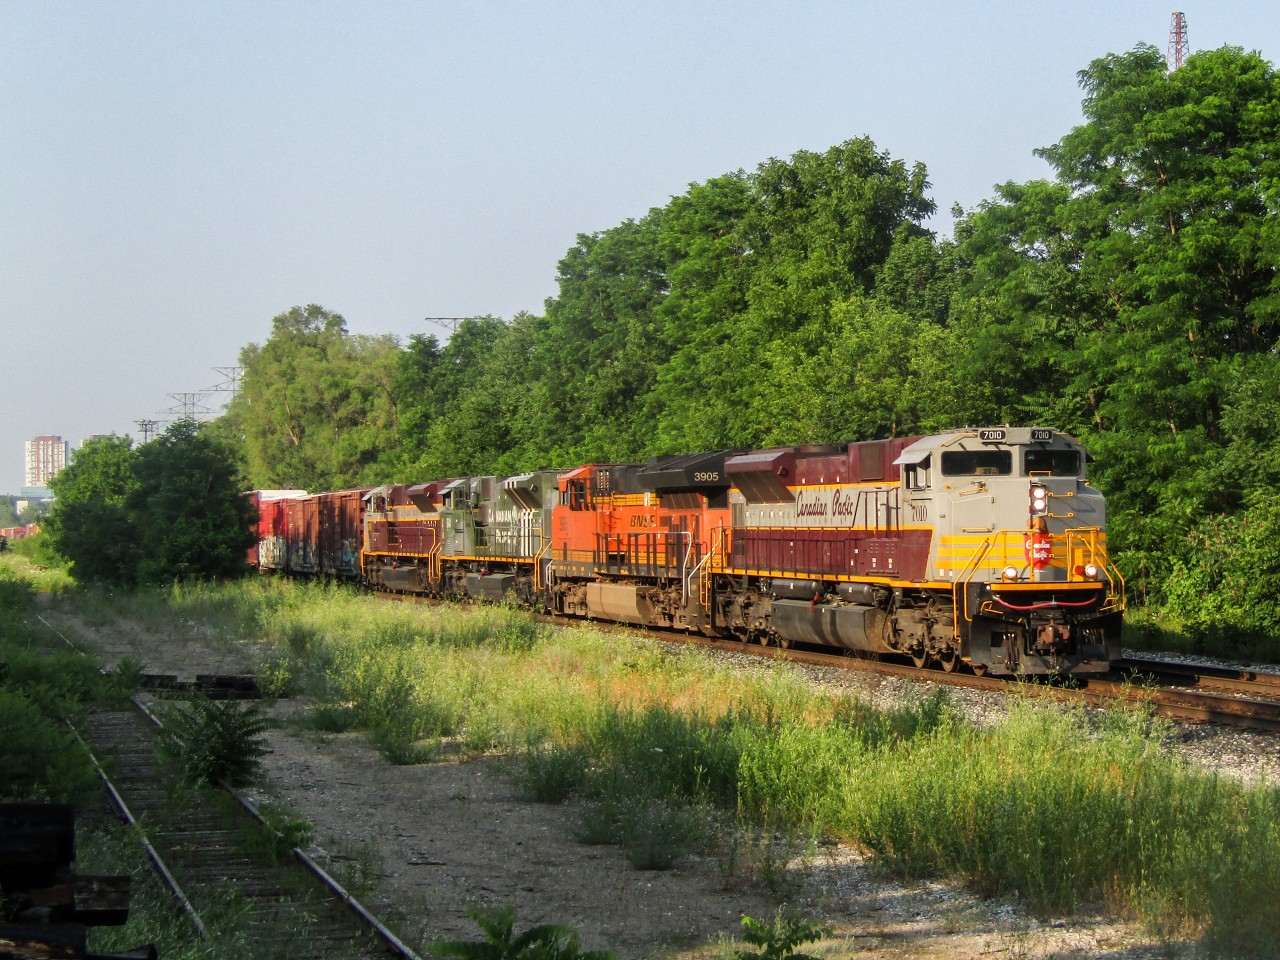 CP 421 blasts through Leaside with an unforgettable consist! CP 7010, CP 6644, and CP 7016 showcase the best that CP has to offer regarding the special paint schemes released on the SD70ACUs. To top it all off; a Tier 4 BNSF Gevo number 3905 makes this consist tick almost every single box in a "dream consist." Well, it isn't dreaming anymore...

For further breakdown:
CP 7010- Heritage scheme "script" lettering
CP 6644- Military D-day commemorative "spitfire" replica scheme
CP 7016- Heritsge scheme "block" lettering
And of course BNSF 3905- Tier 4 Gevo